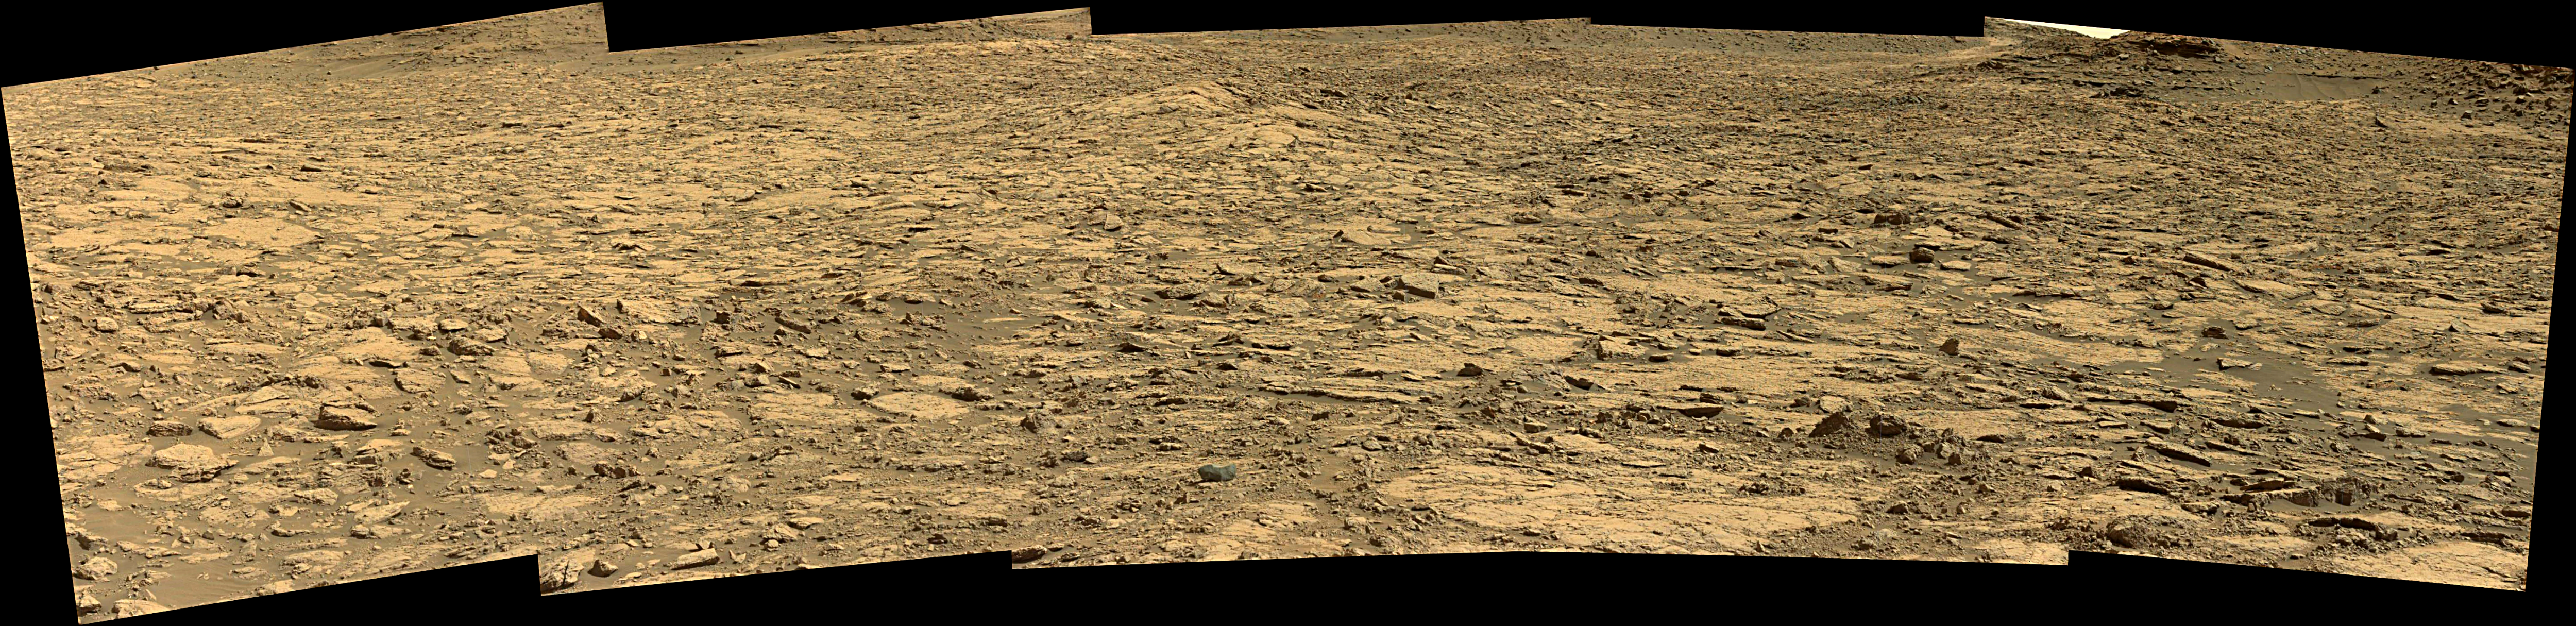 panoramic curiosity rover view 1e - sol 1435 - was life on mars